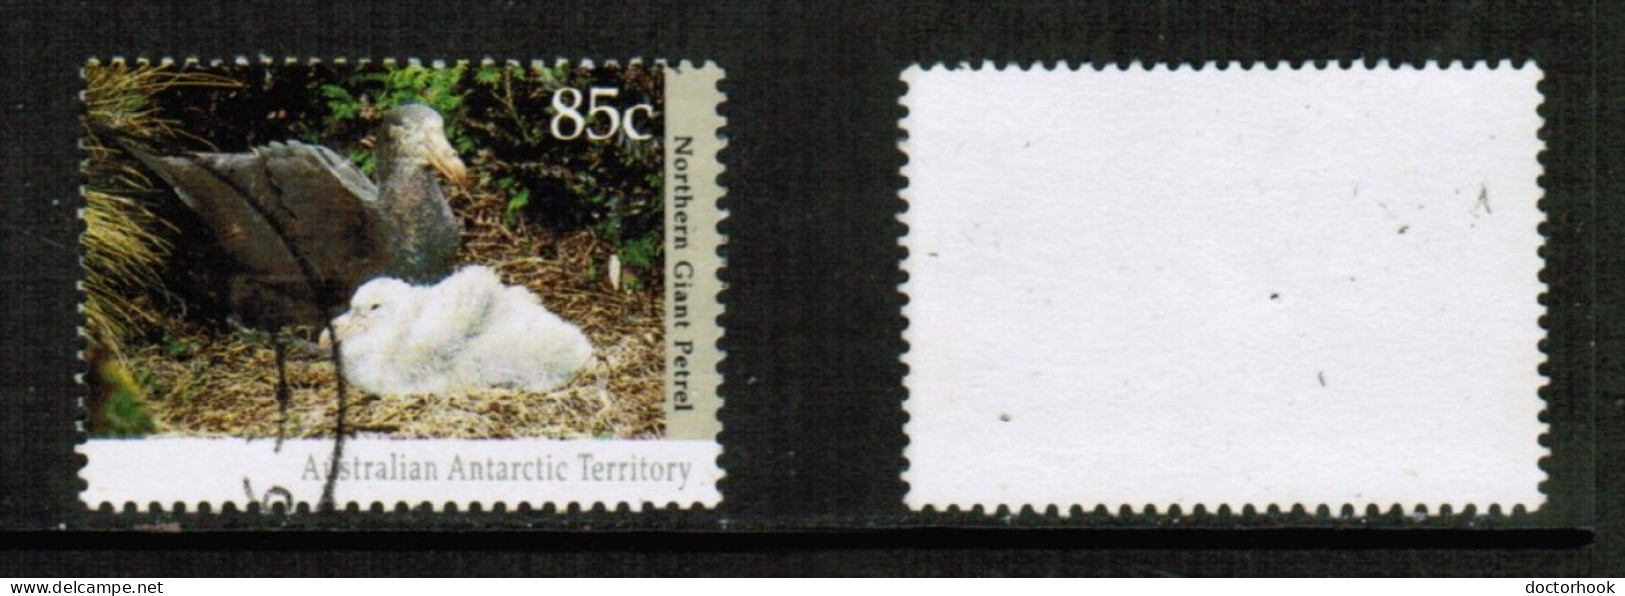 AUSTRALIAN ANTARCTIC TERRITORY   Scott # L 85 USED (CONDITION AS PER SCAN) (Stamp Scan # 928-4) - Oblitérés